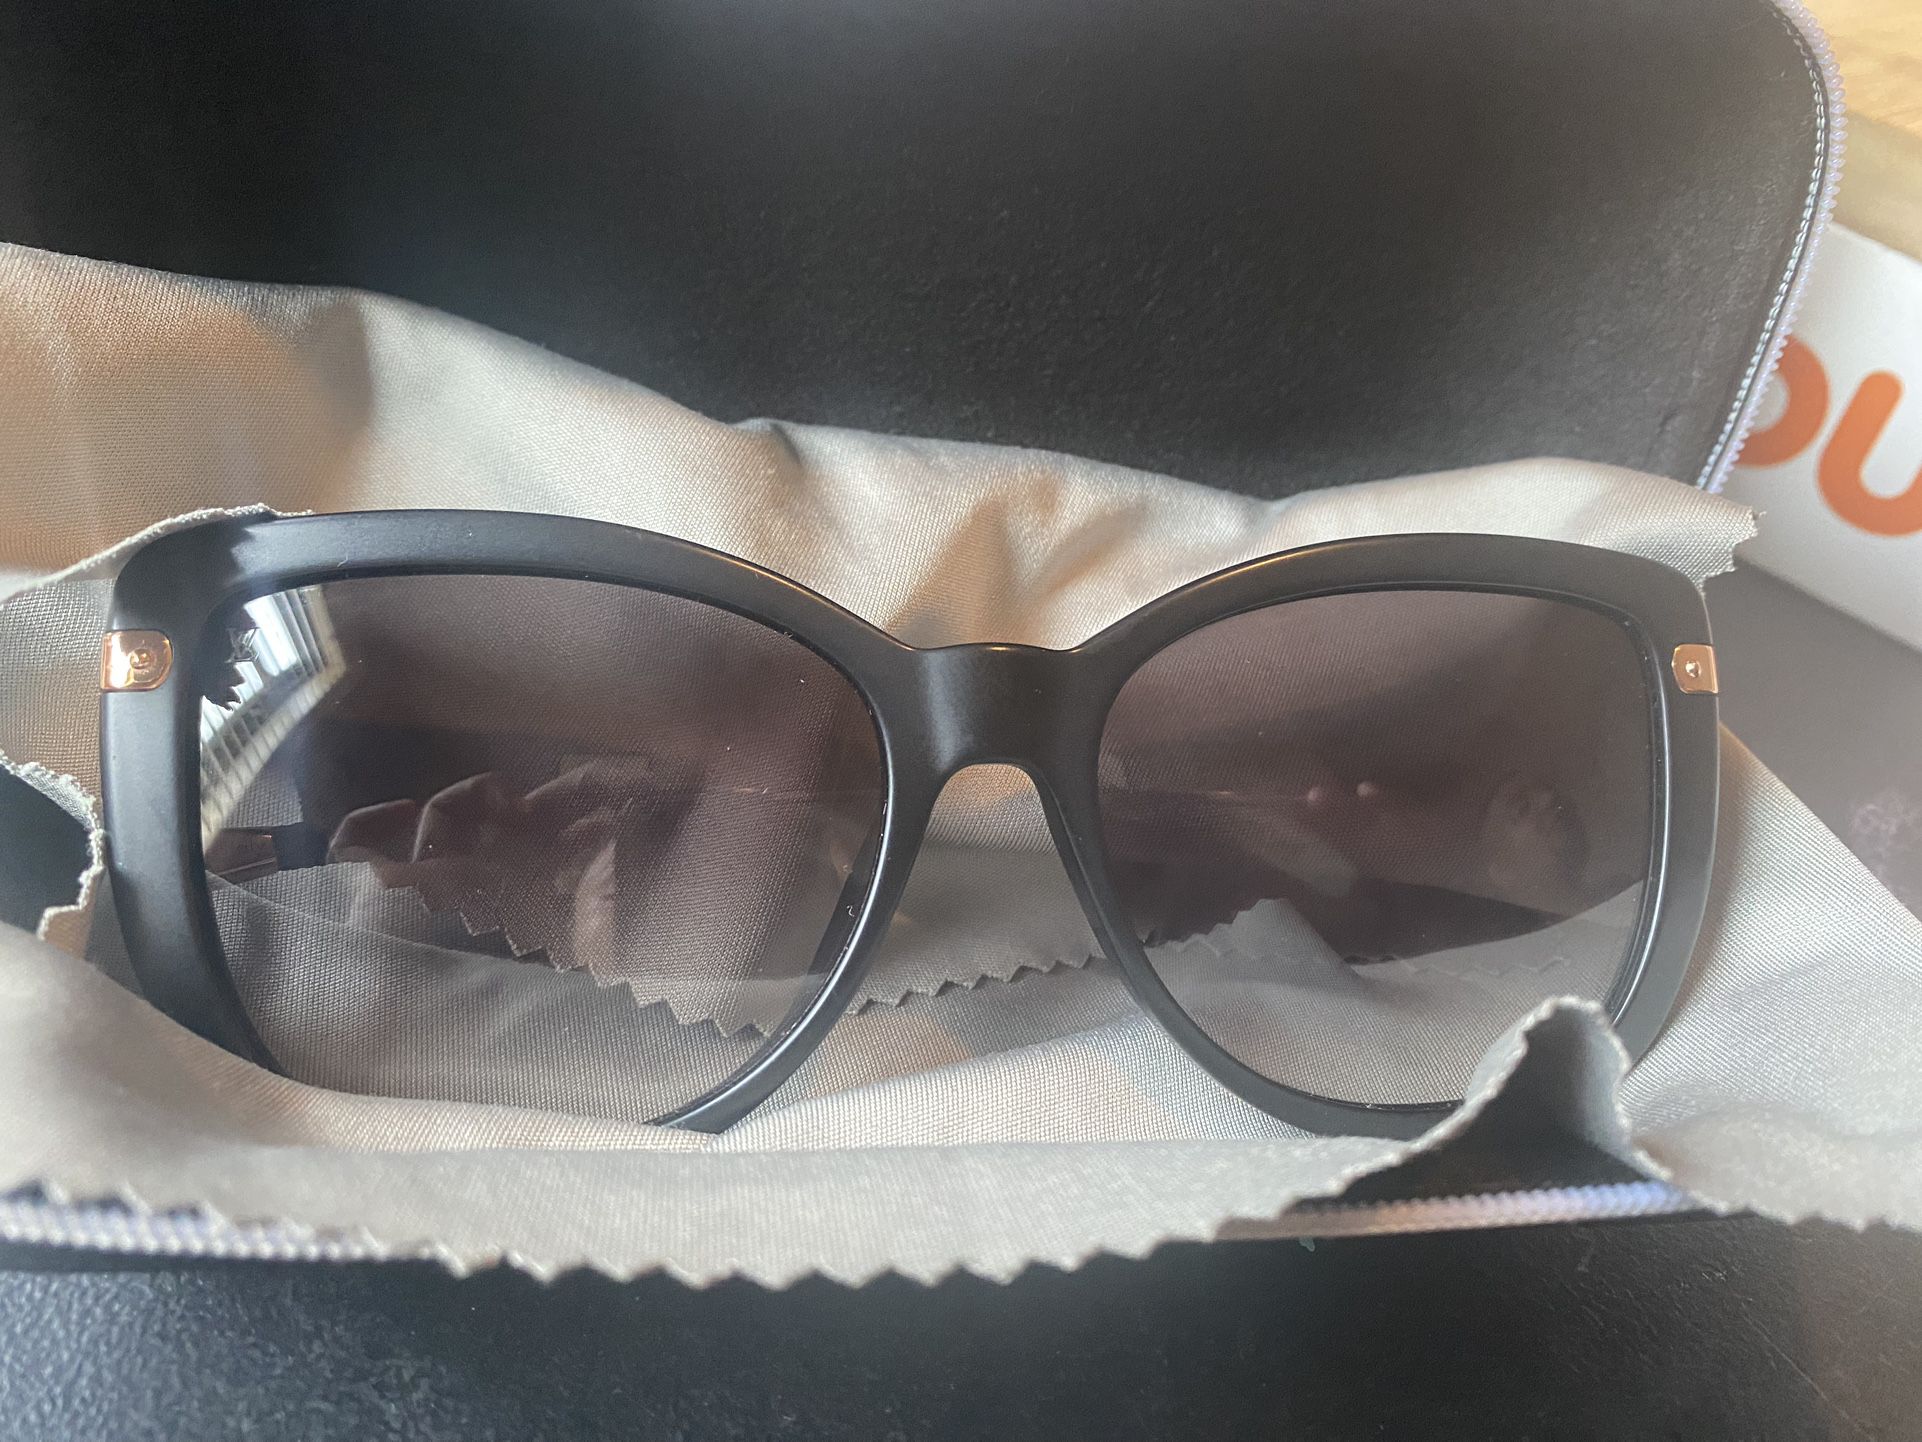 Louis Vuitton Glasses for Sale in Bronx, NY - OfferUp